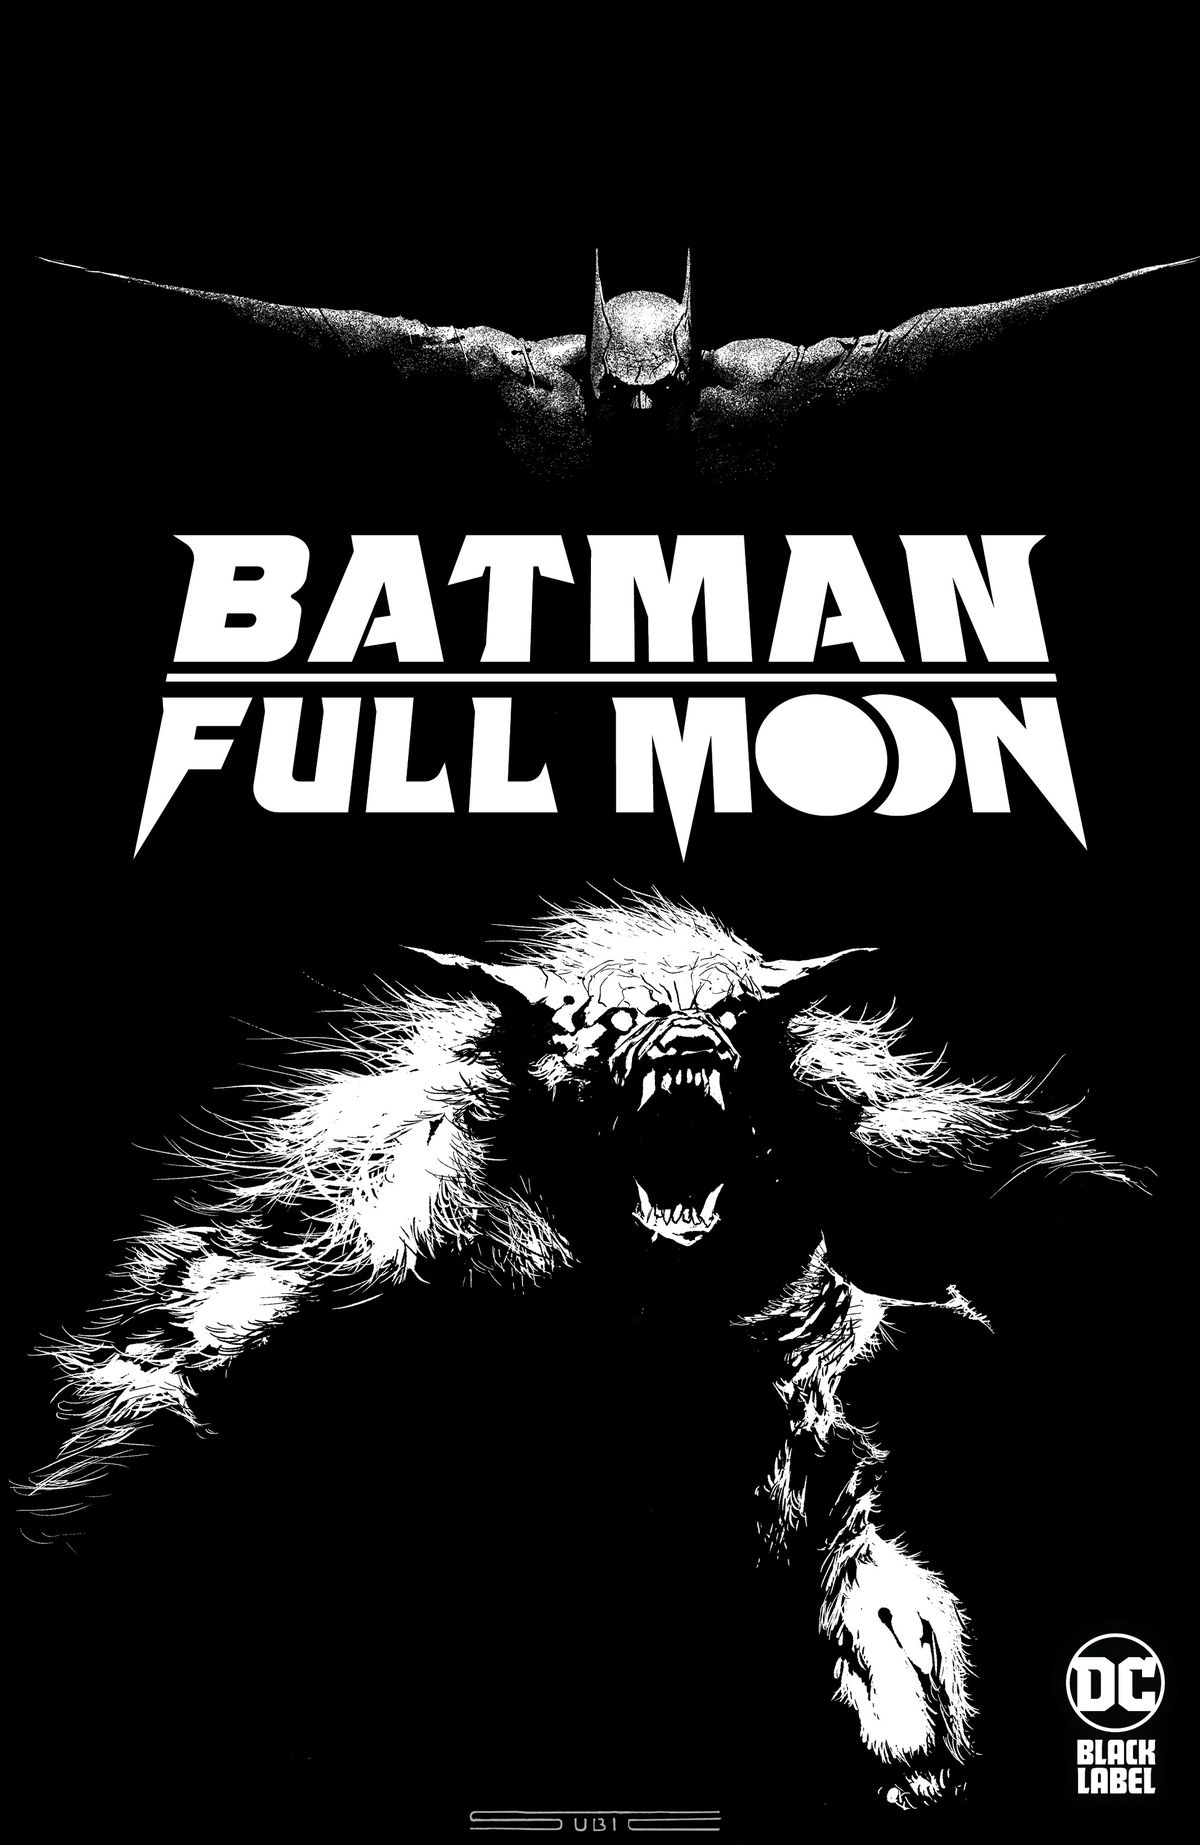 A werewolf snarls as Batman swoops down over him on the cover to Batman: Full Moon.